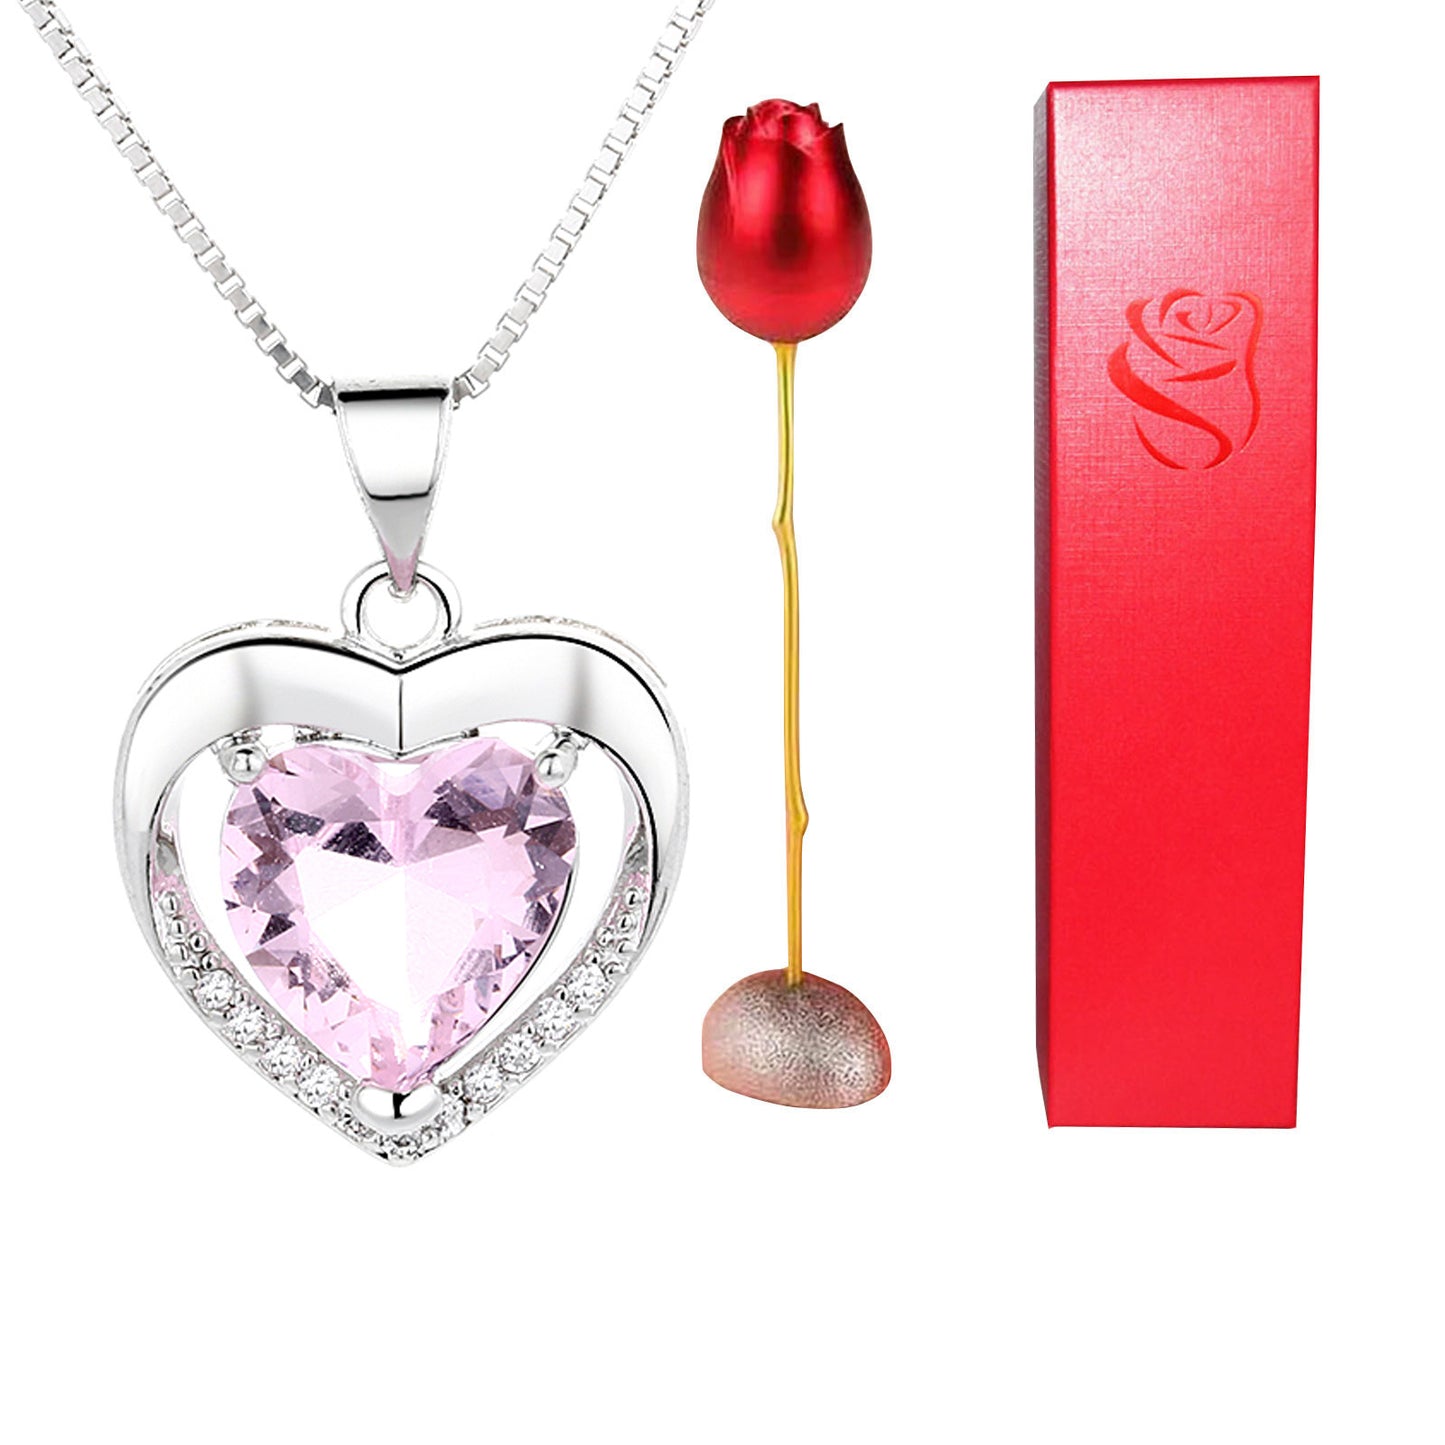 Surprise!! Heart shaped pendant delivered in a Rose flower